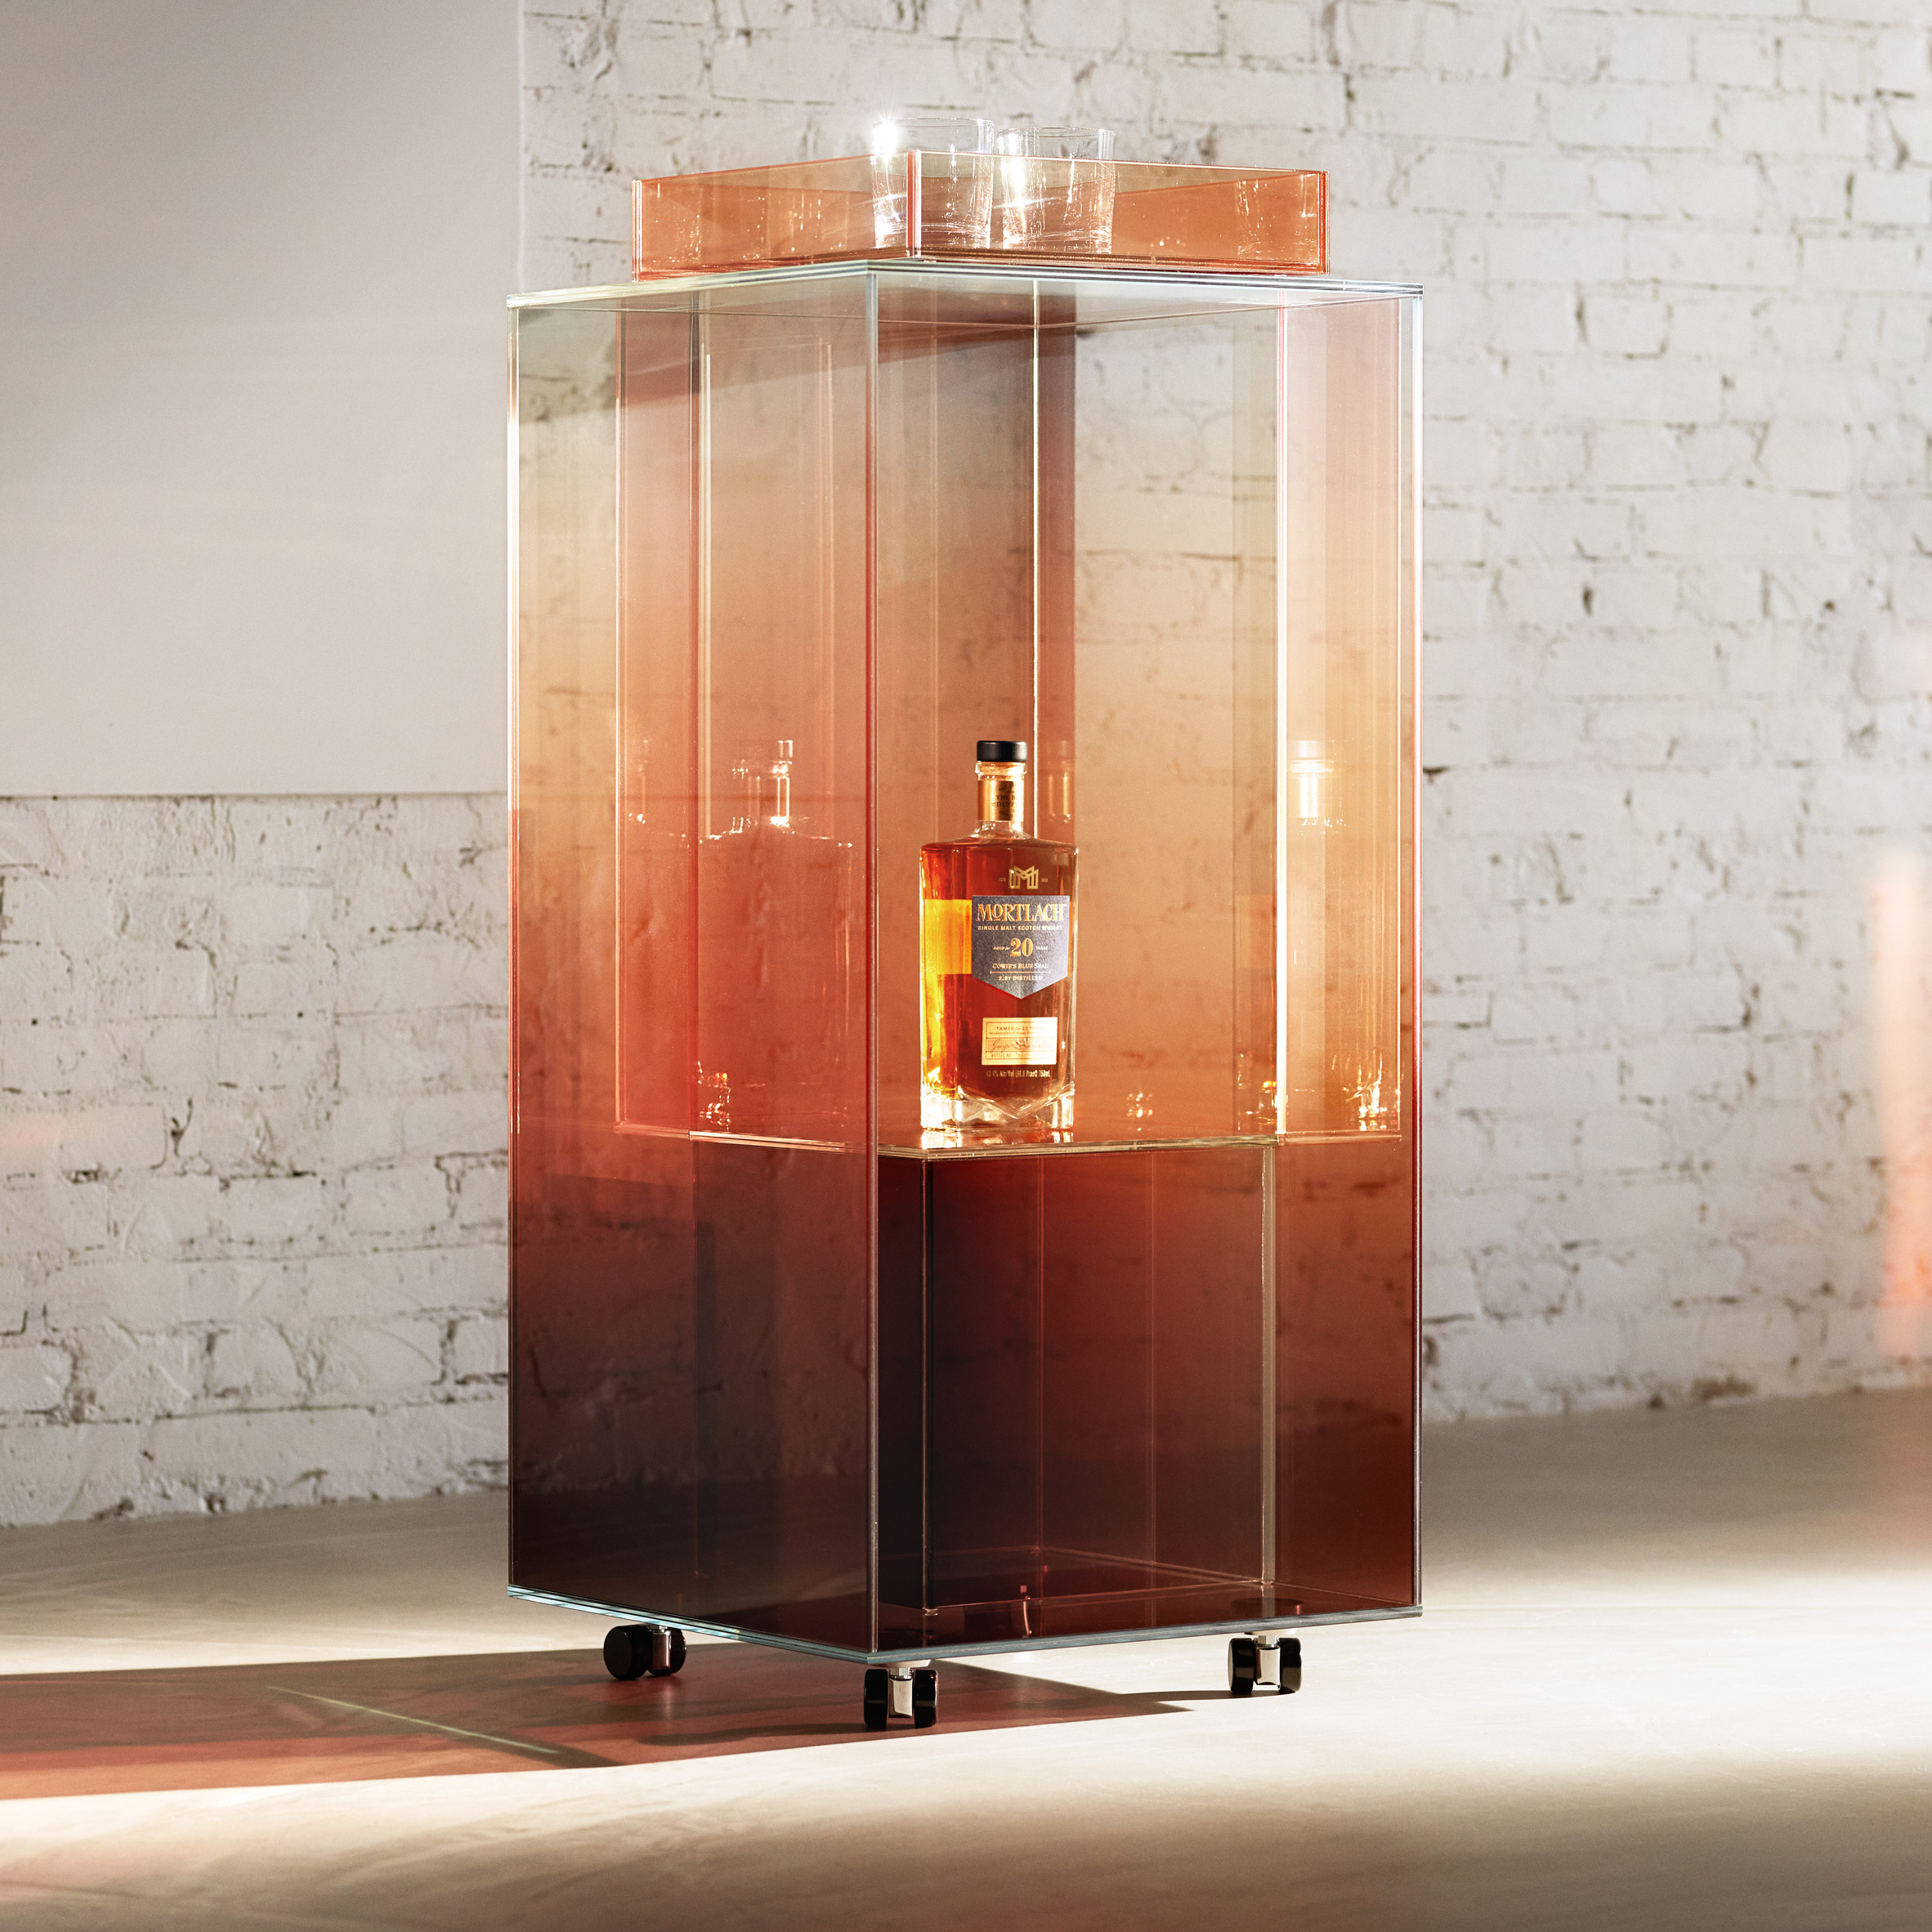 A whisky-coloured bar cart made from panels of glass